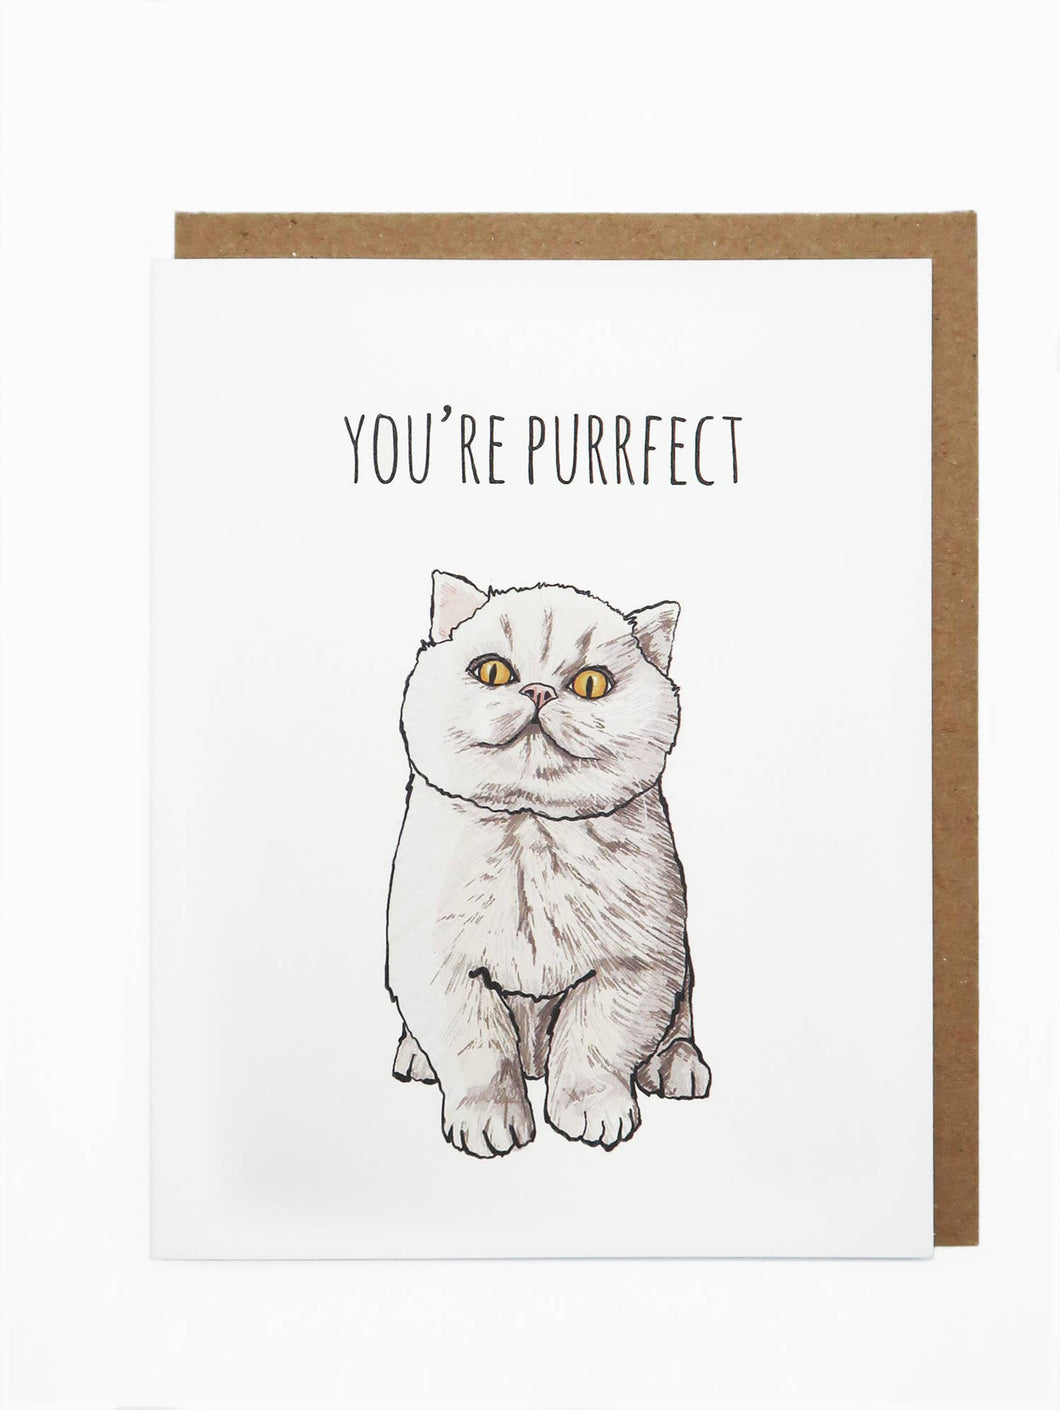 You're Purrfect